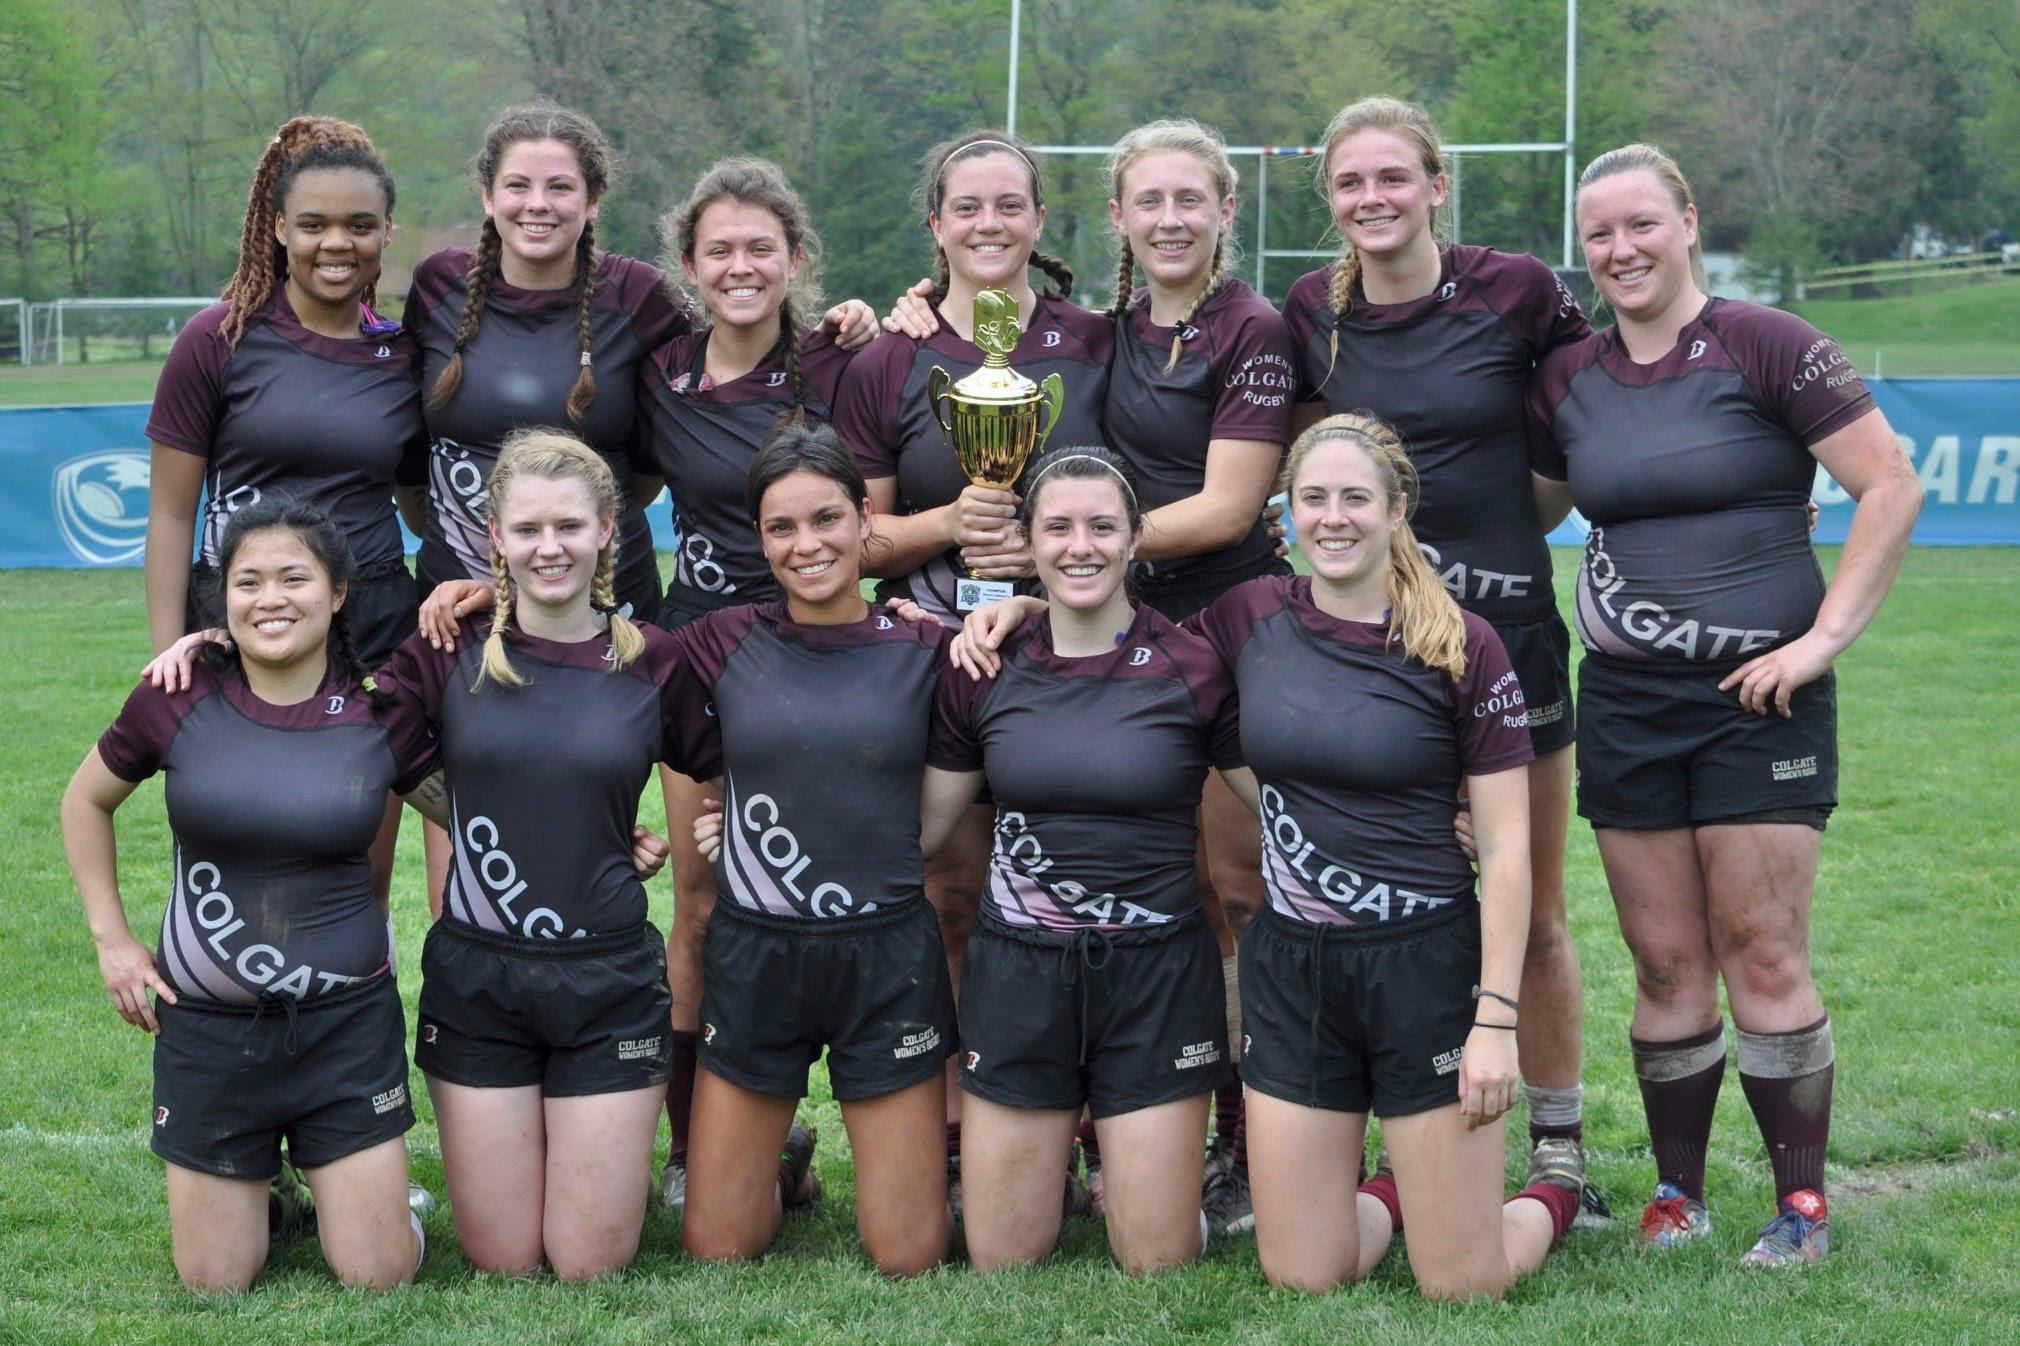 Women’s Rugby wins 2017 NSCRO 7s National Championship | Colgate University